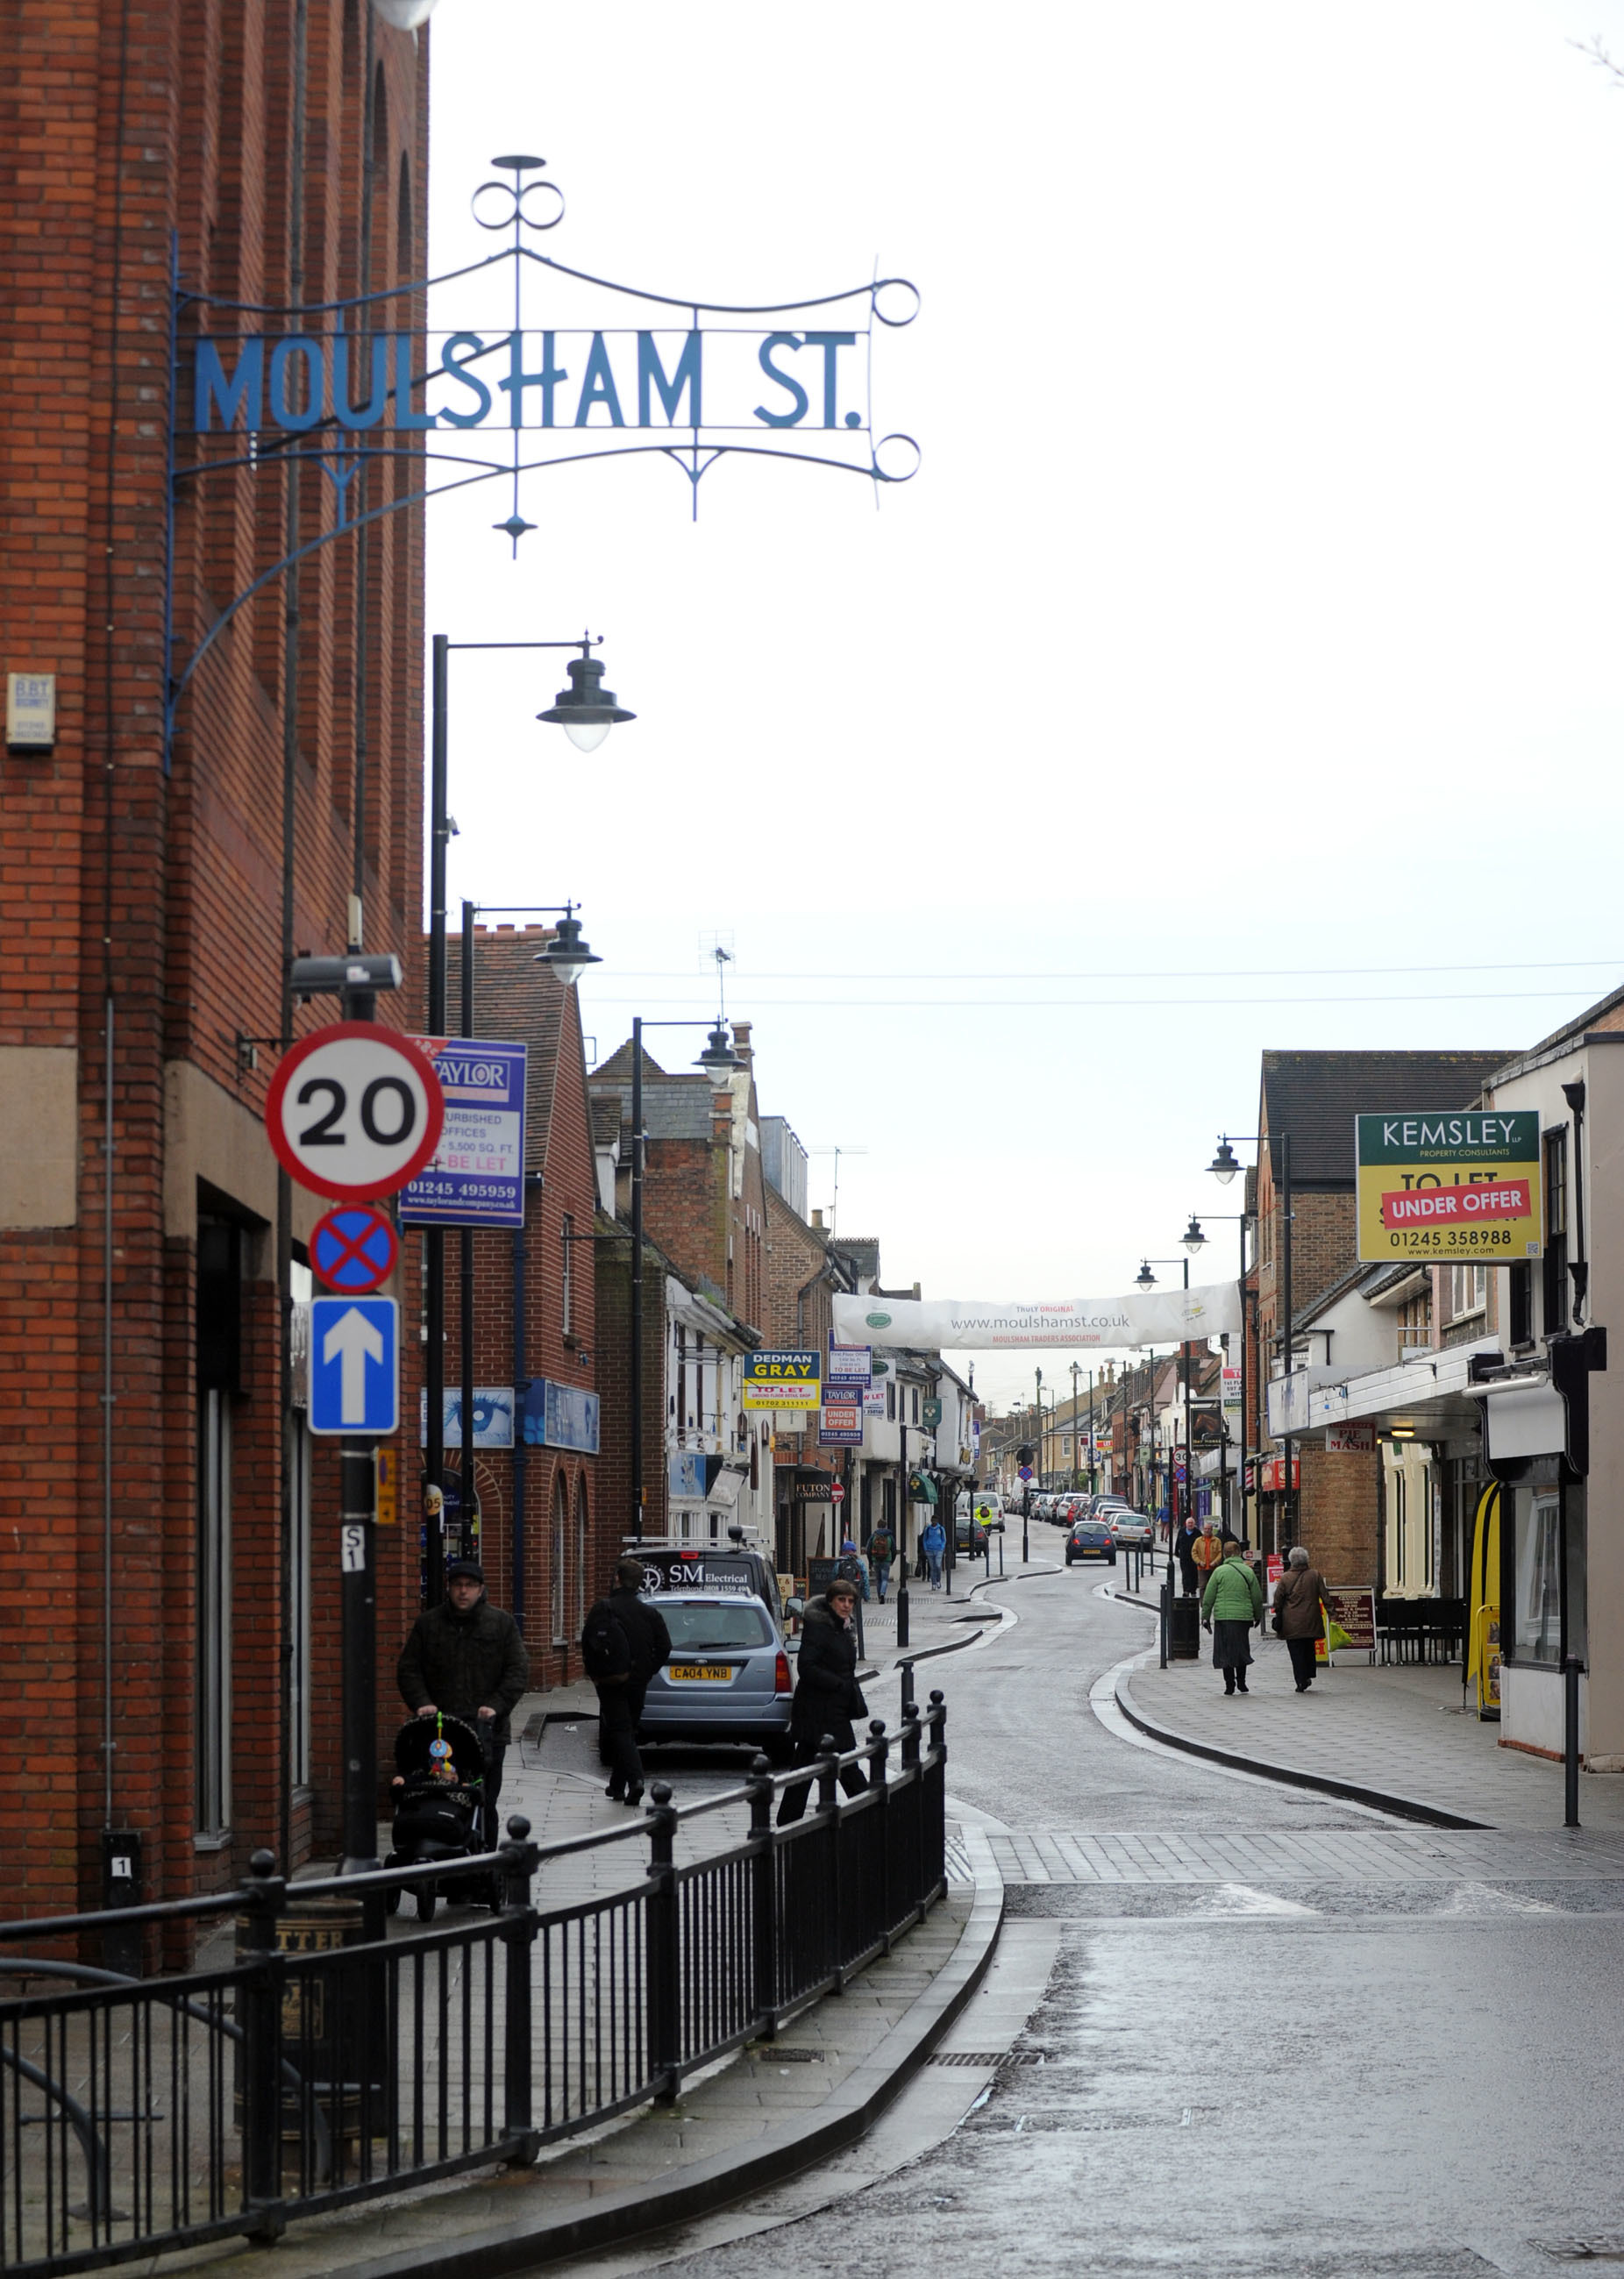 Moulsham Street.GVs around Chelmsford.Picture: Paul Watson. Date 27.01.2014 Copyright: The Echo..